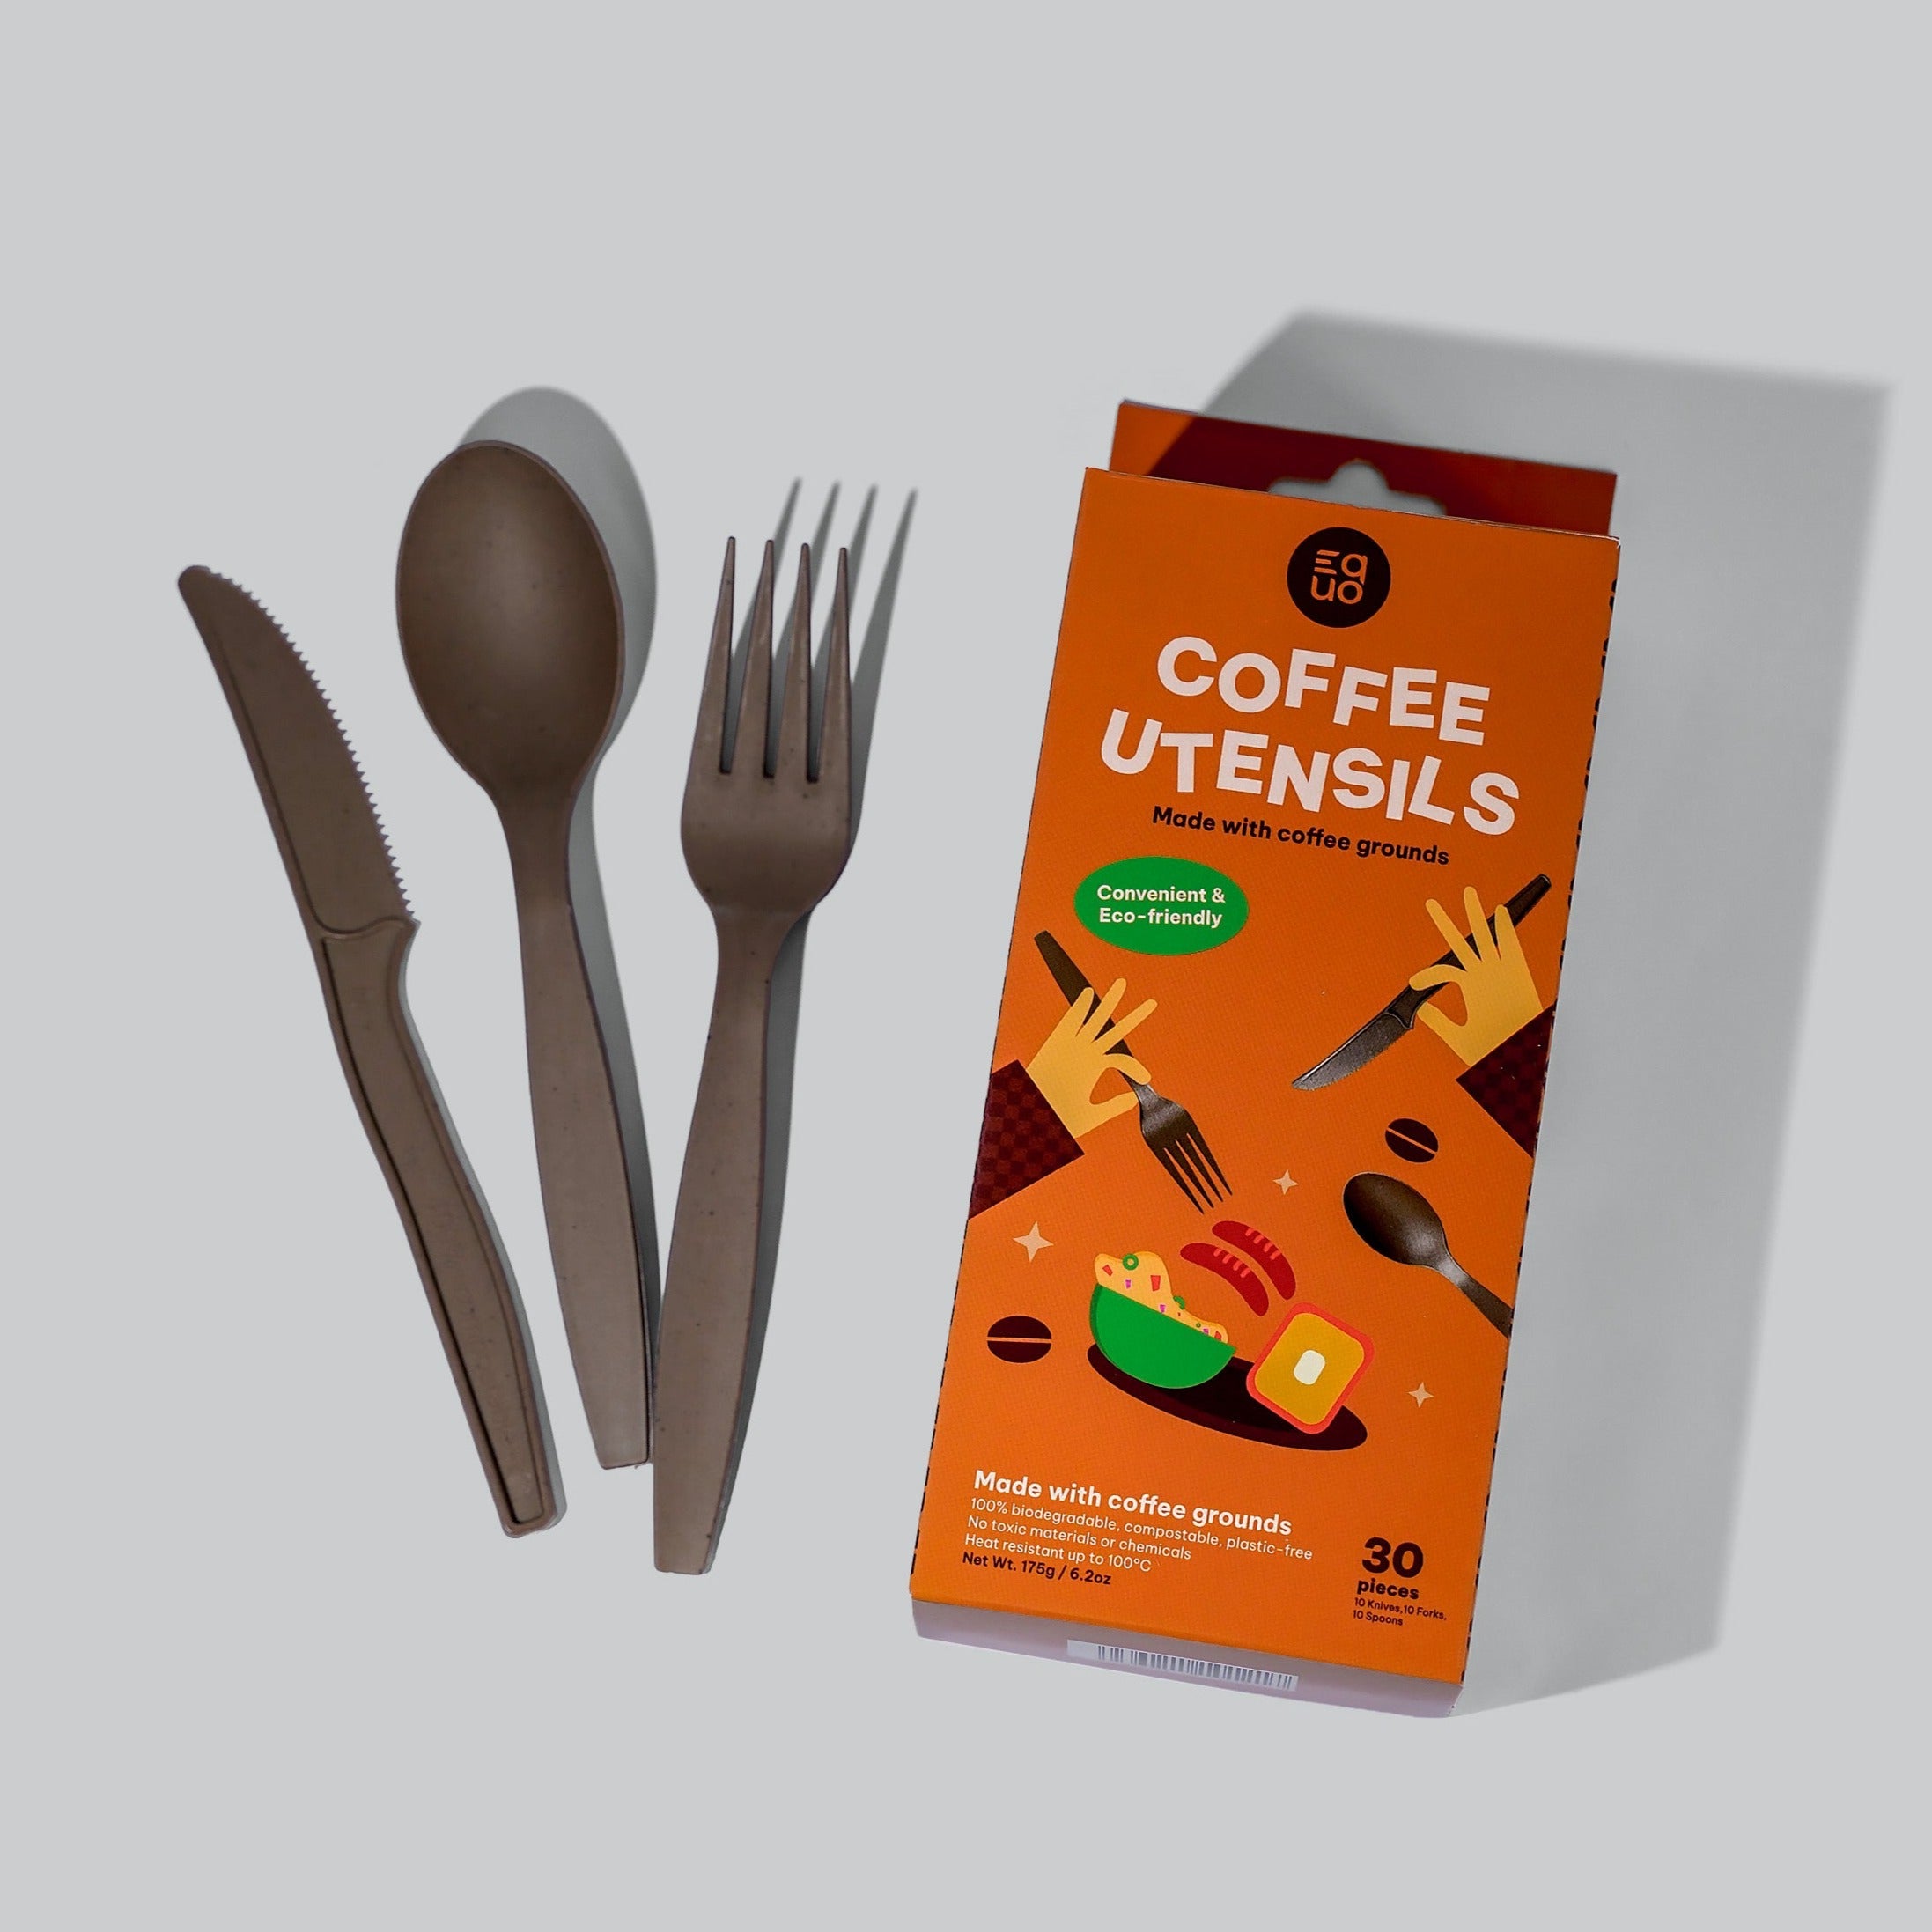 Coffee Utensils (Knives, Spoons, Forks) - Pack Of 30 (10 each) by EQUO